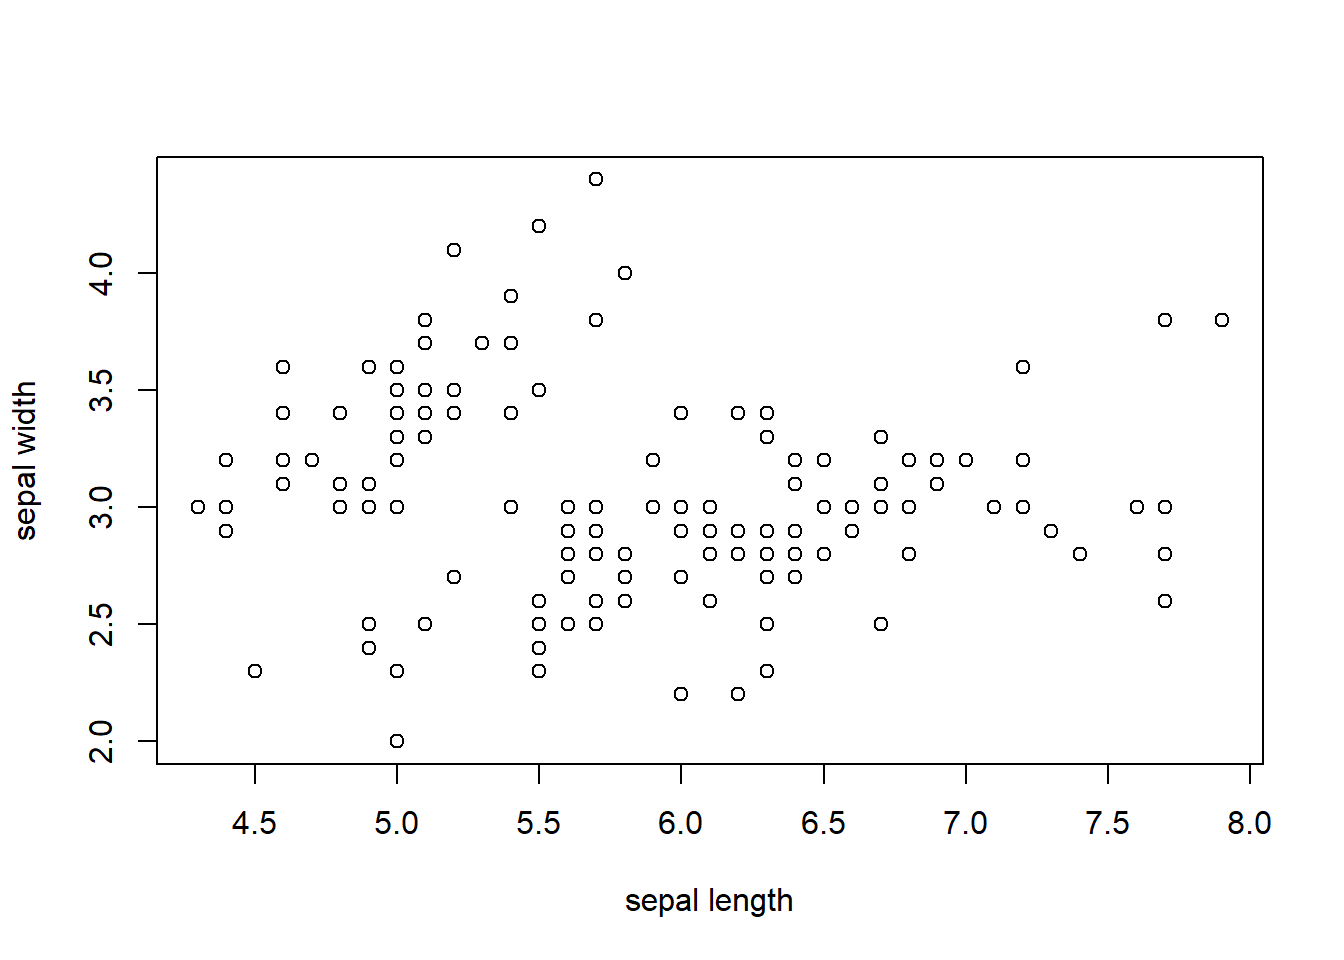 Scatter plot of sepal length and sepal width